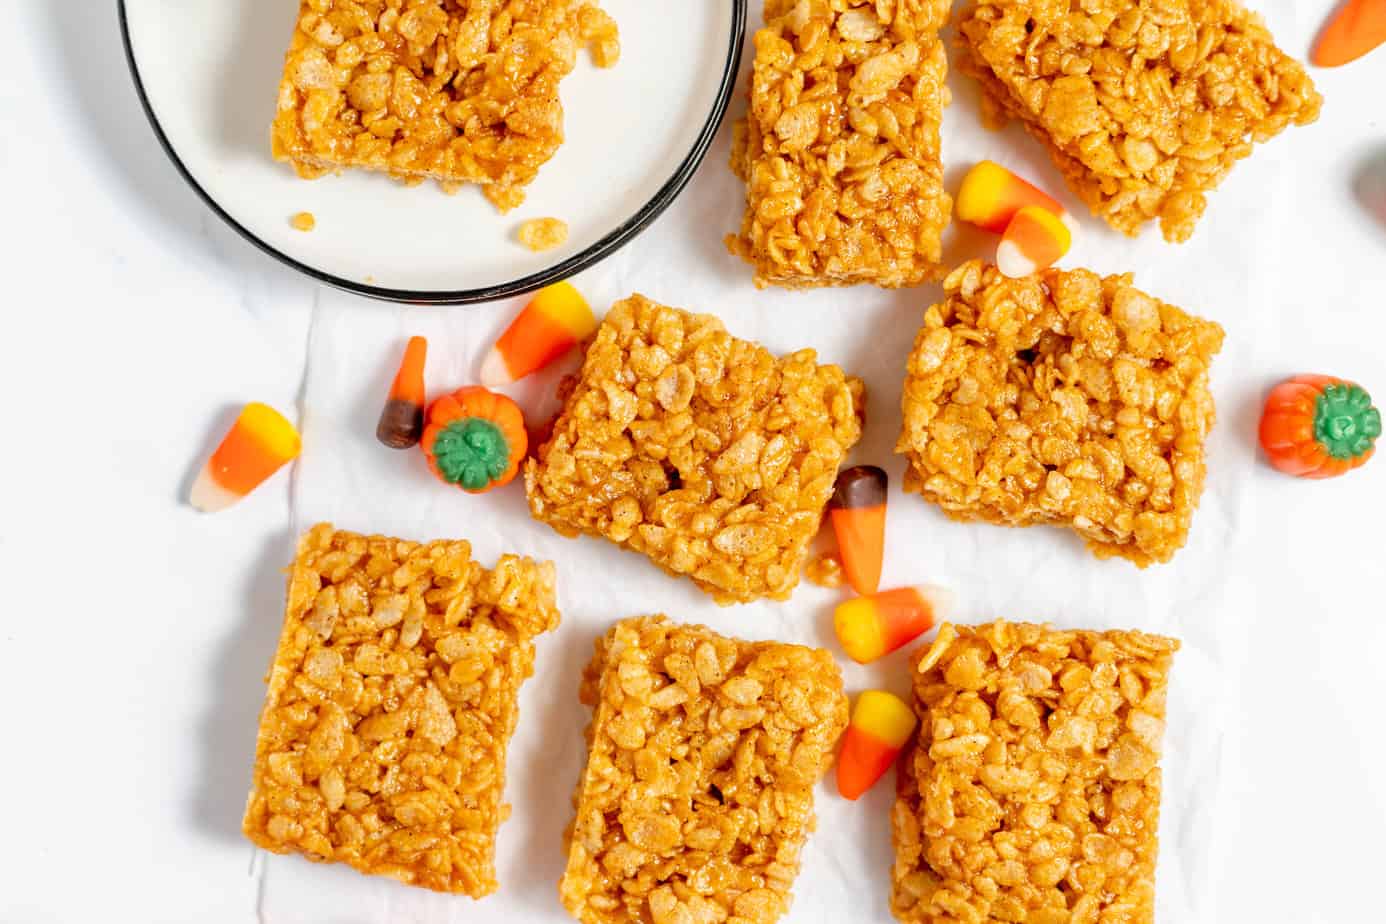 Pumpkin Rice Krispie Treats scattered on a white surface with two on a plate and some candy corn scattered near them